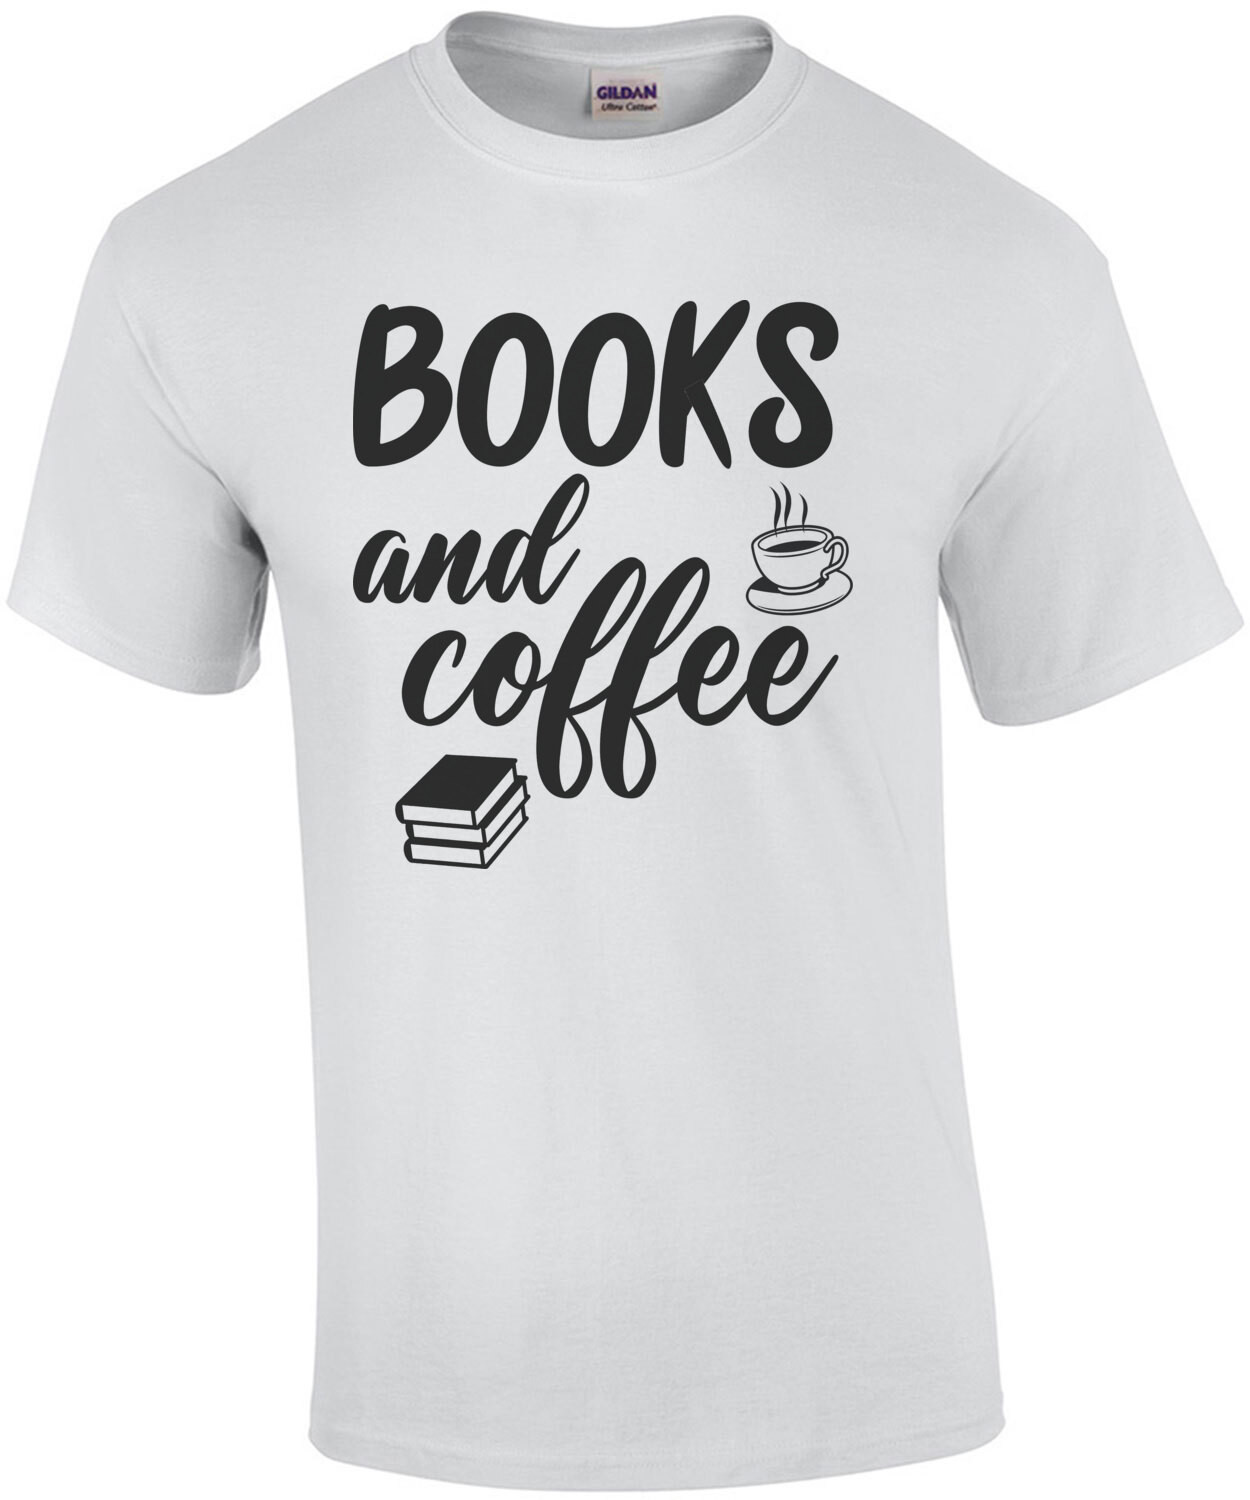 Books and Coffee - Reading and coffee t-shirt